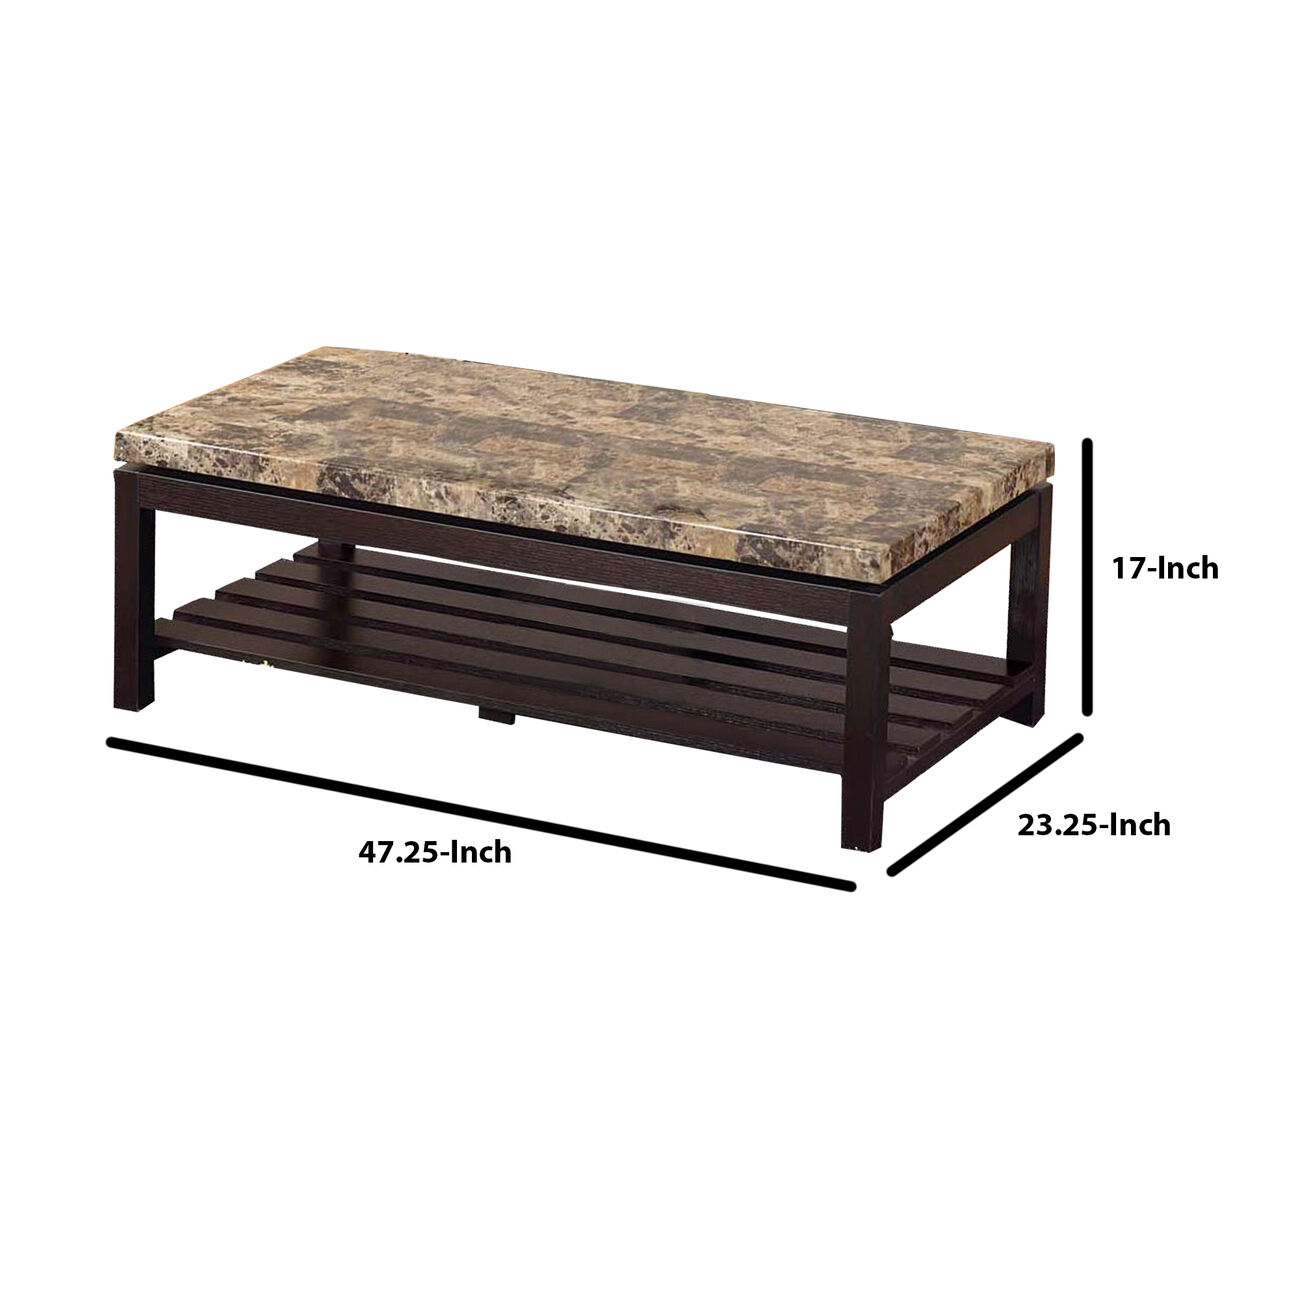 Wooden Coffee Table With Faux Marble Top, Red Cocoa Brown